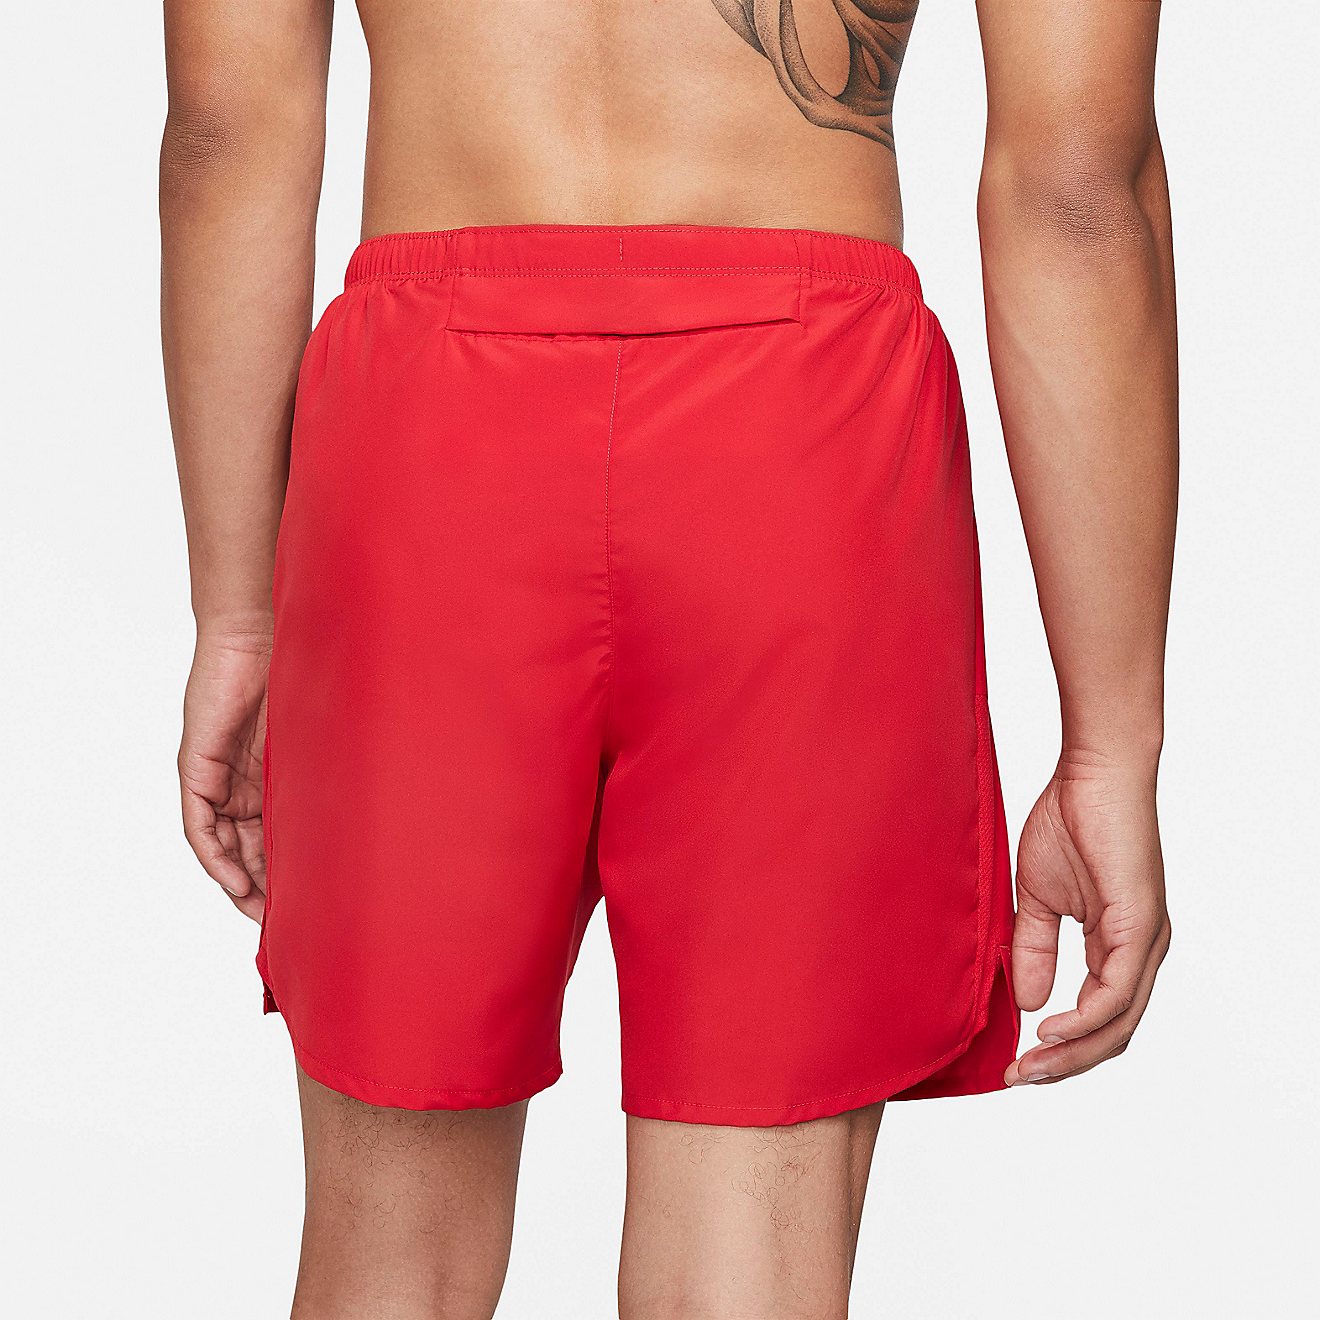 Nike Men's Dri-FIT Challenger Brief-Lined Running Shorts 7 in                                                                    - view number 4